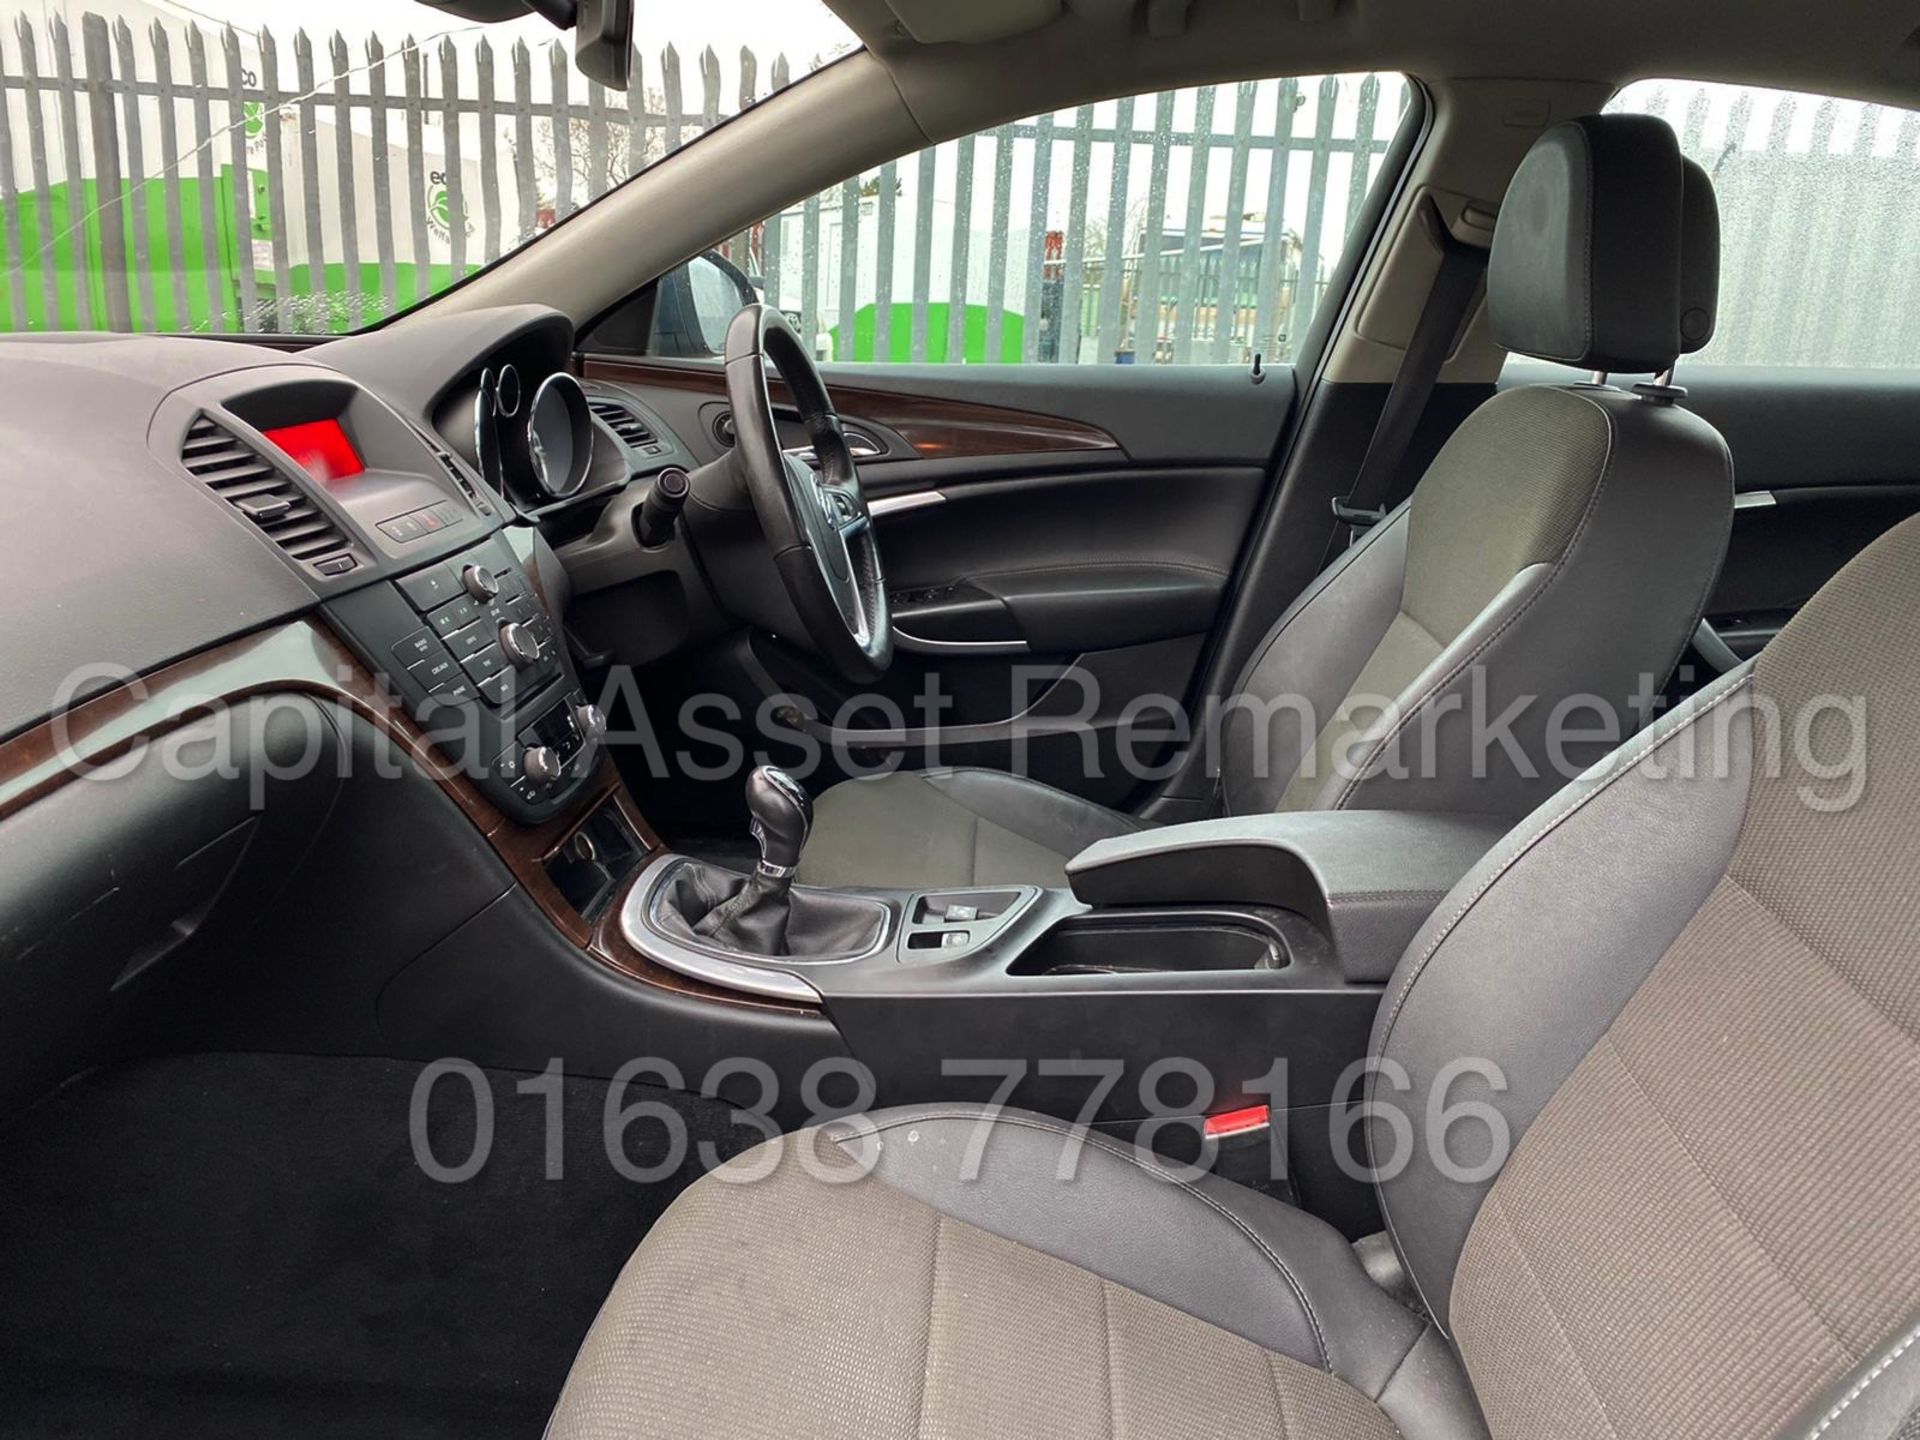 ON SALE VAUXHALL INSIGNIA *SE EDITION* (2009) '1.8 PETROL -6 SPEED' *A/C* LOW MILES ! (NO VAT) - Image 12 of 15